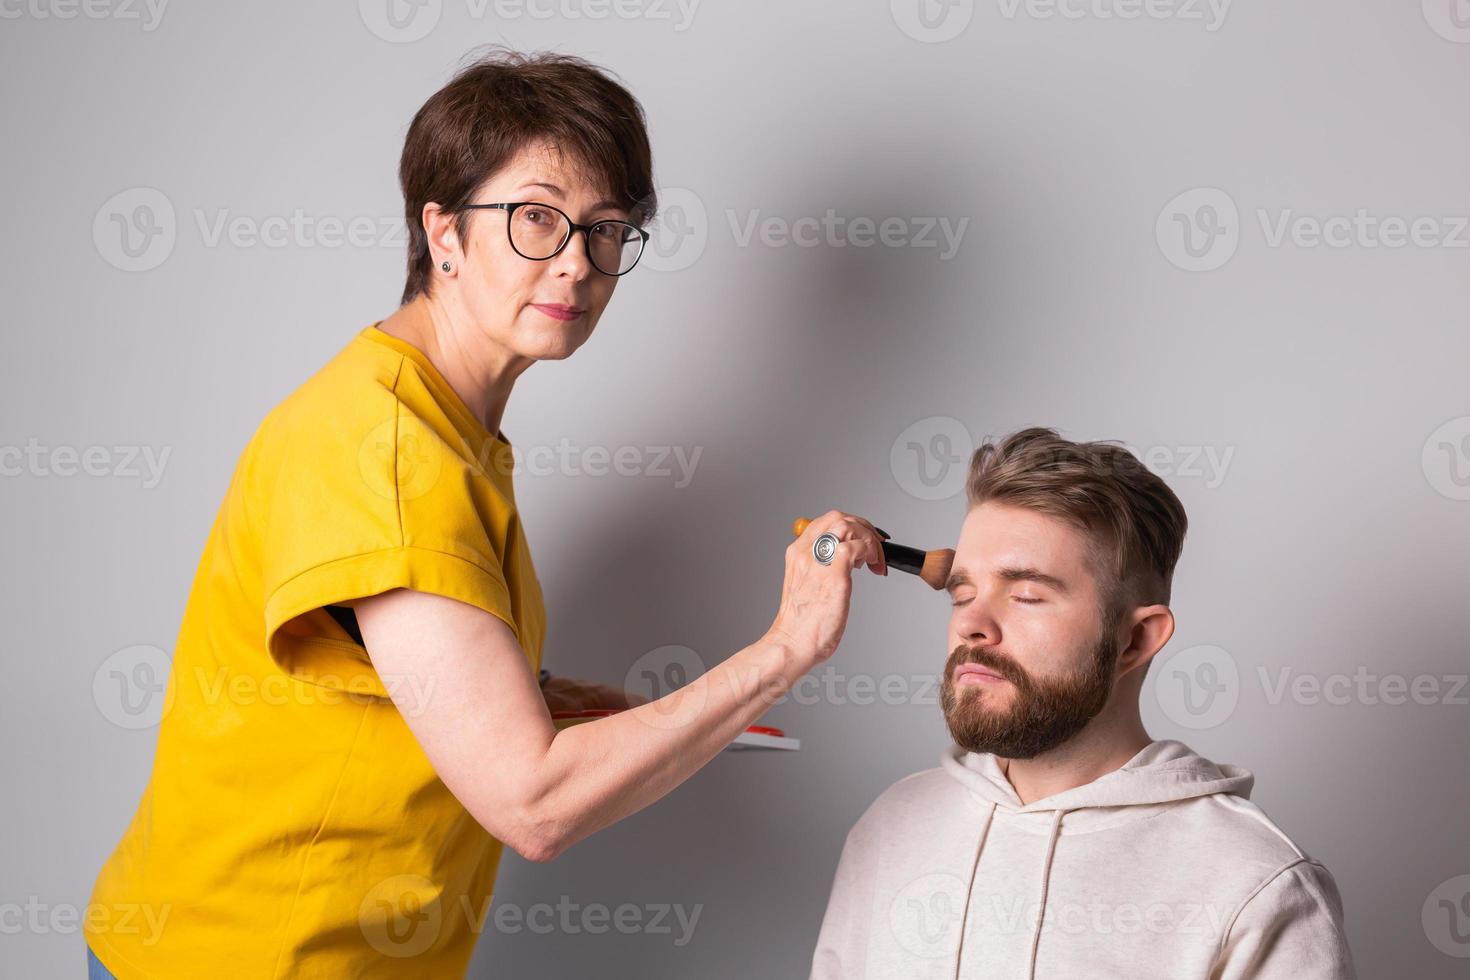 Professional make-up artist doing young man makeup in studio photo